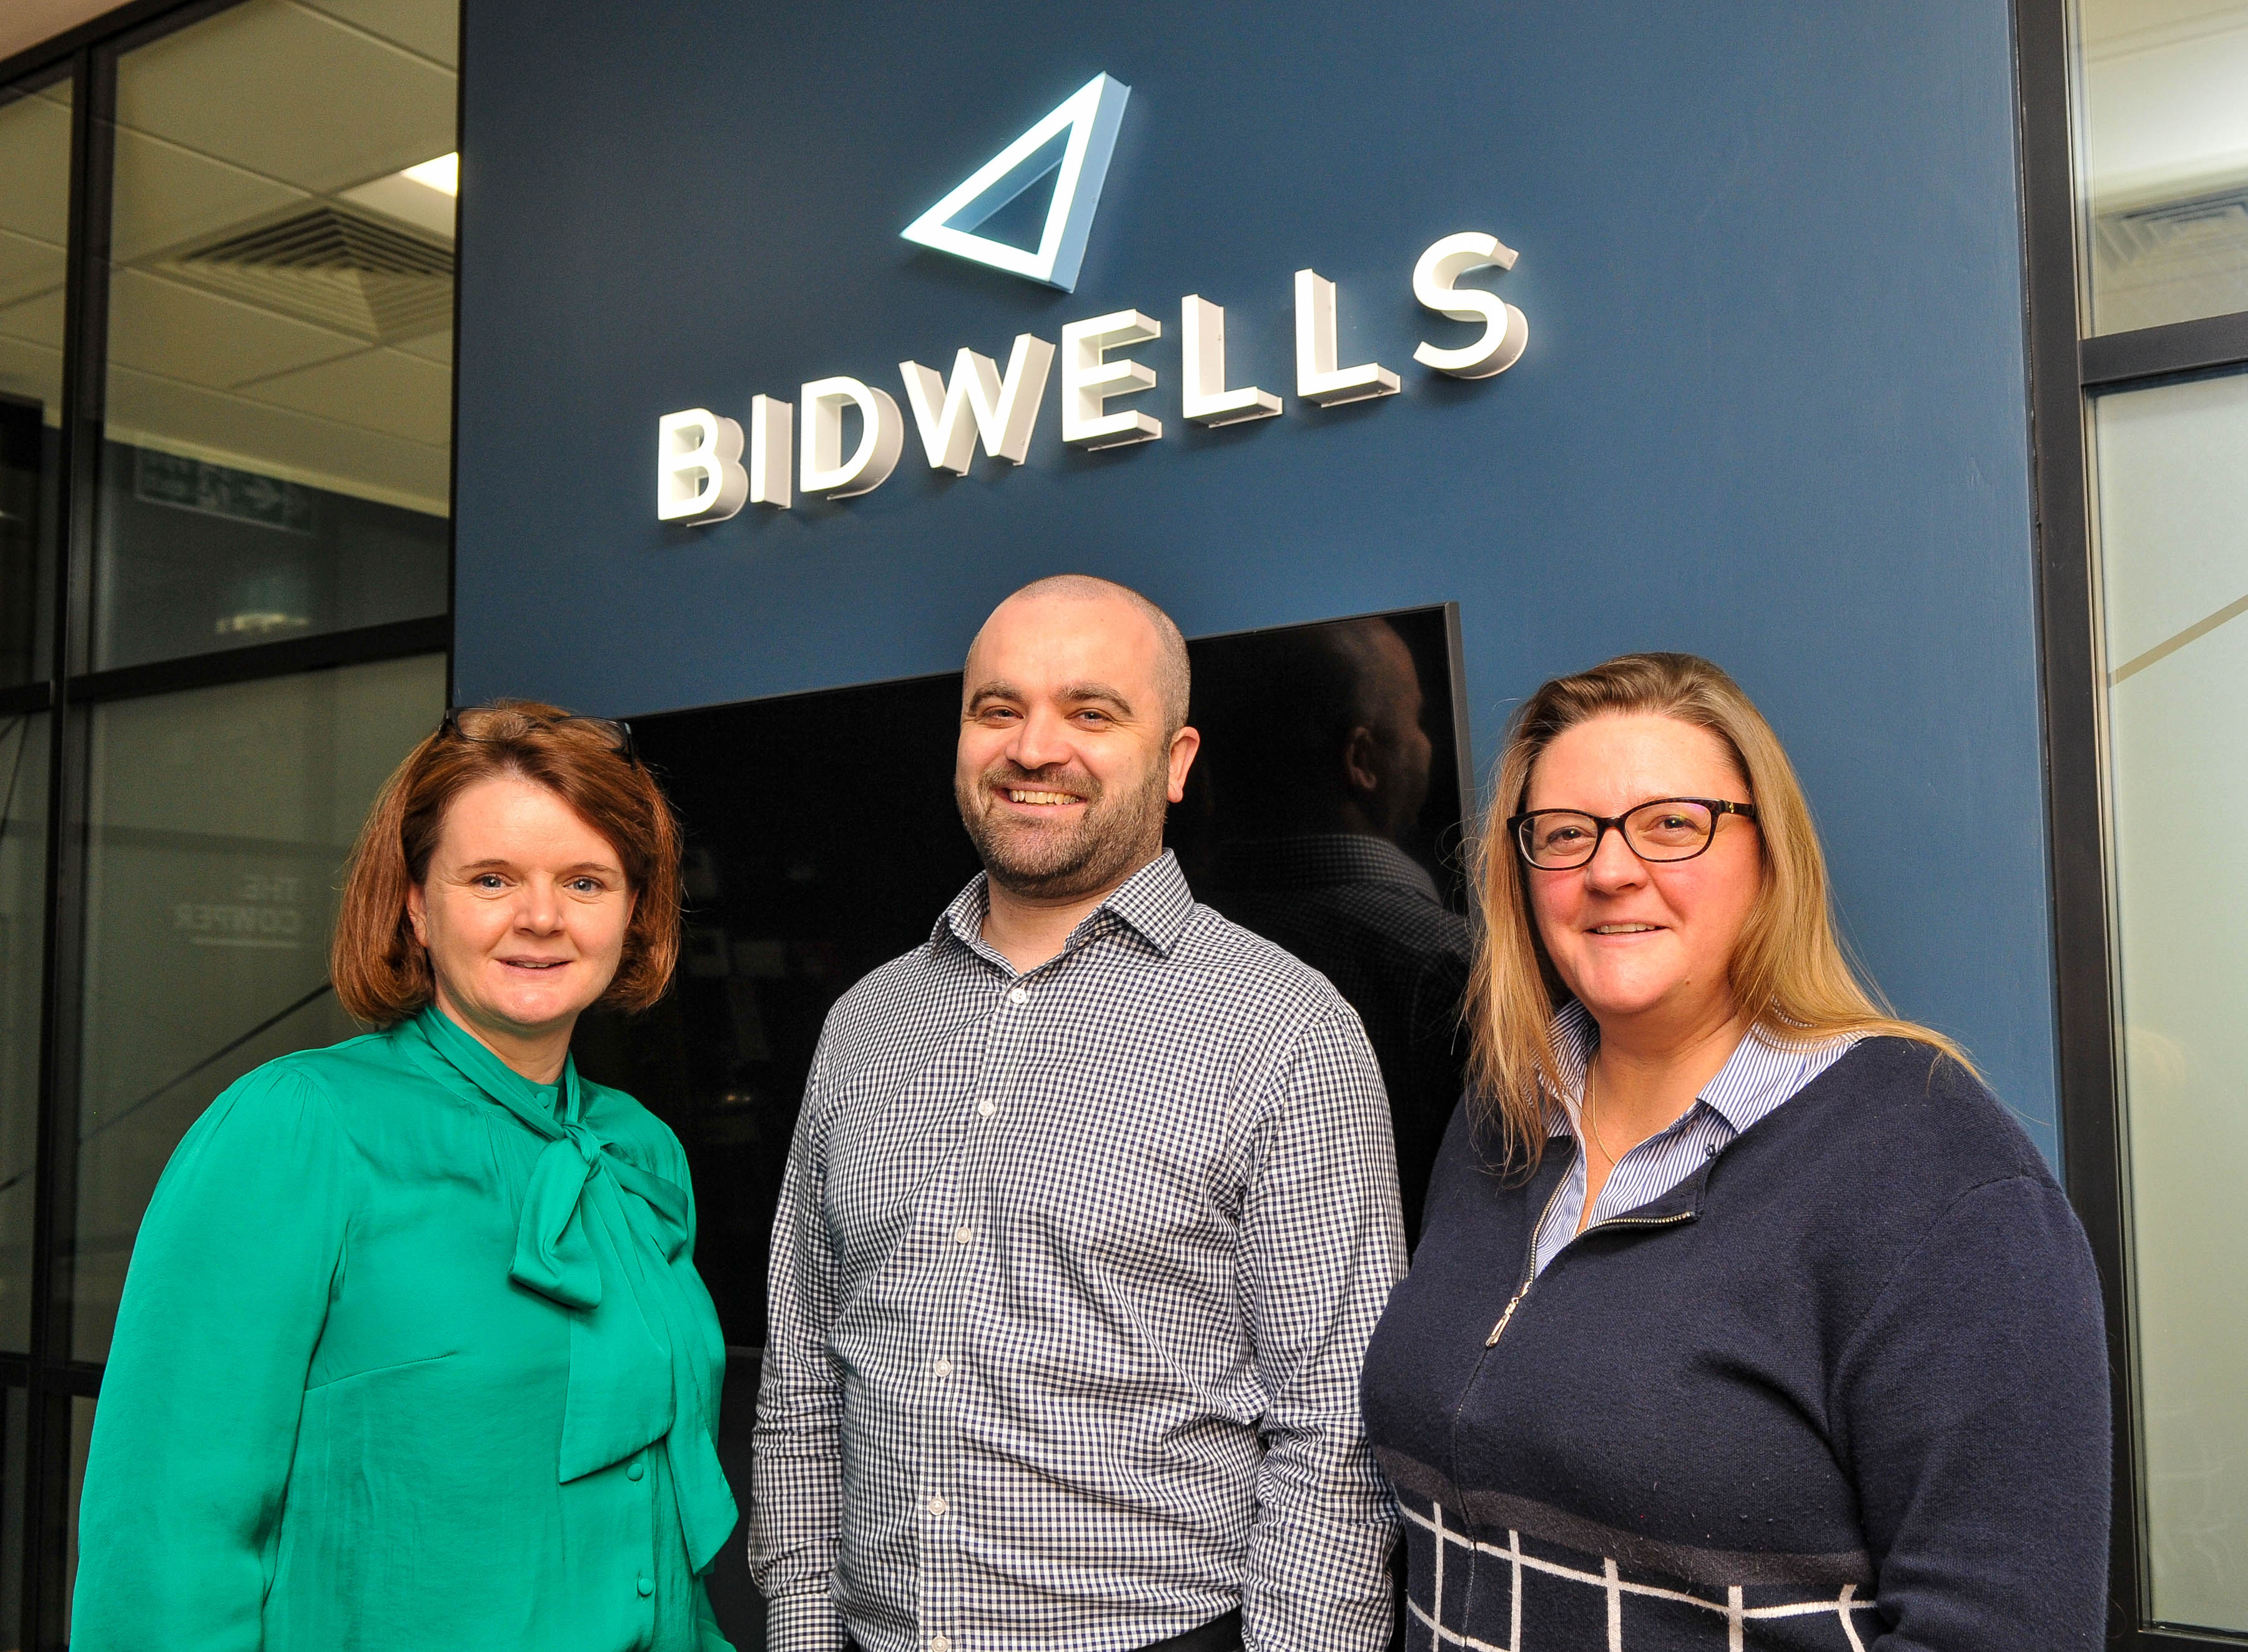 Bidwells Strengthens its Milton Keynes Team with Senior Hire and Office Relocation 